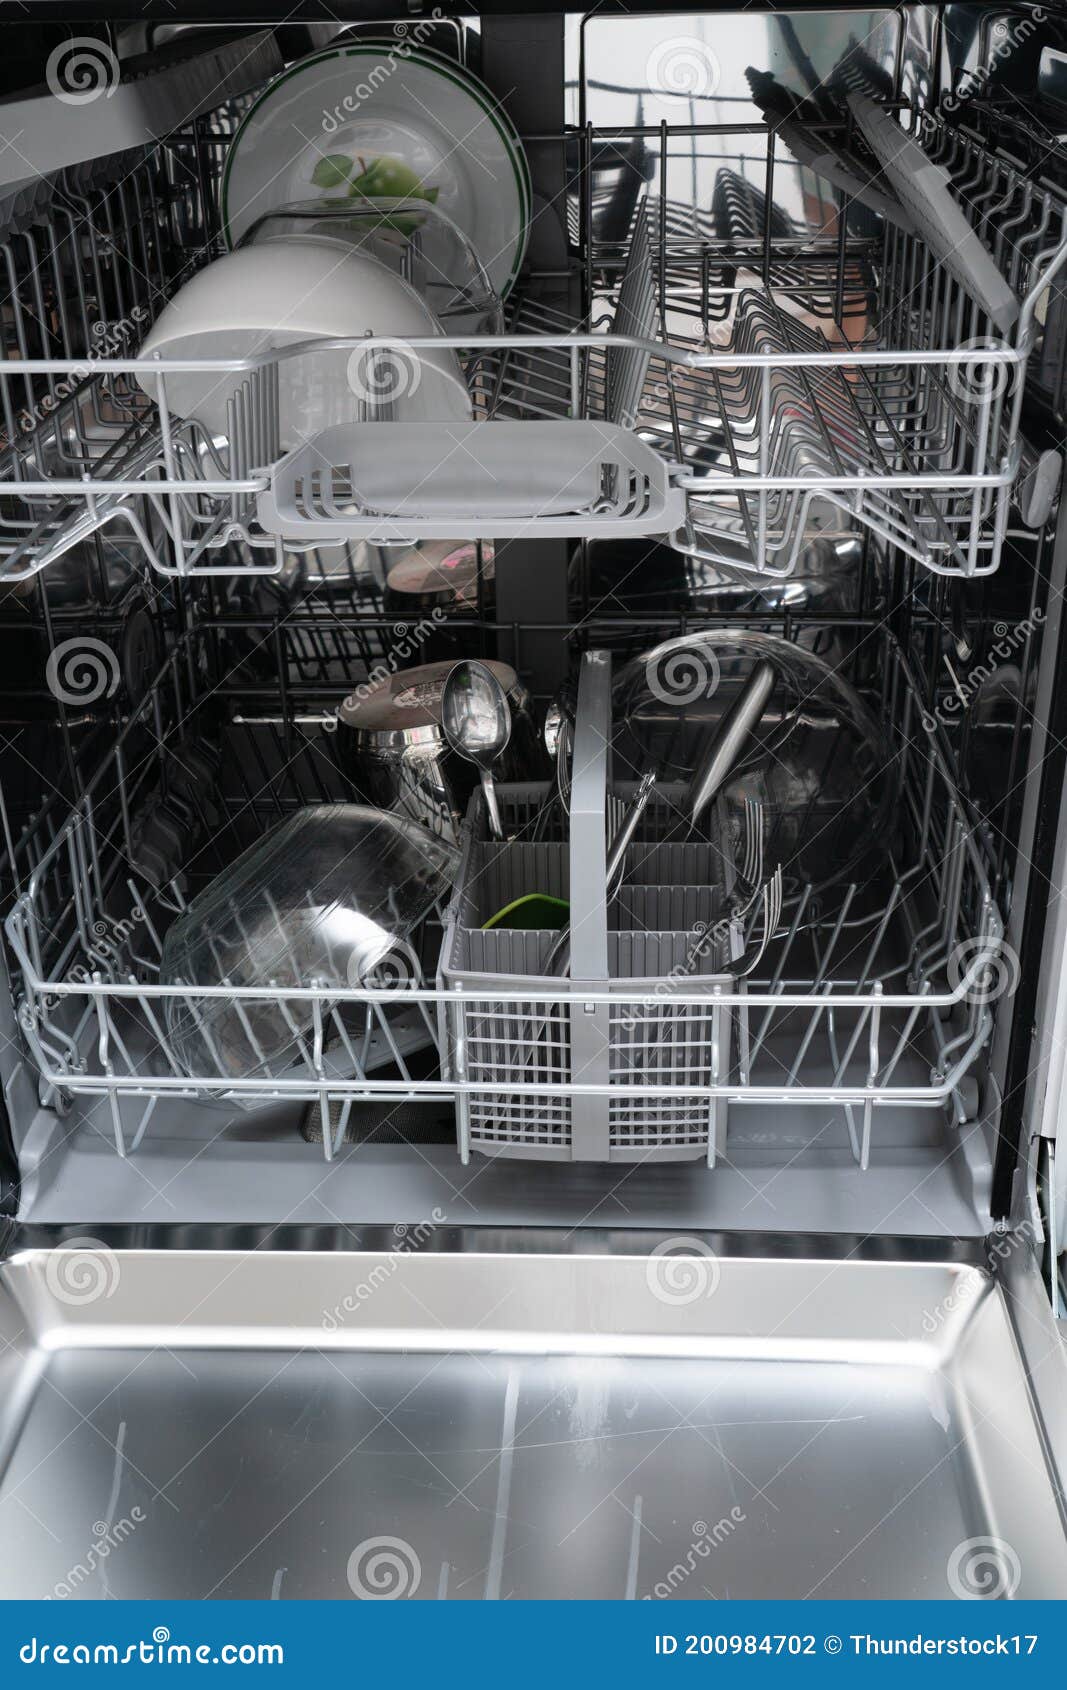 open dishwasher with cutlery and plates as domestic appliance